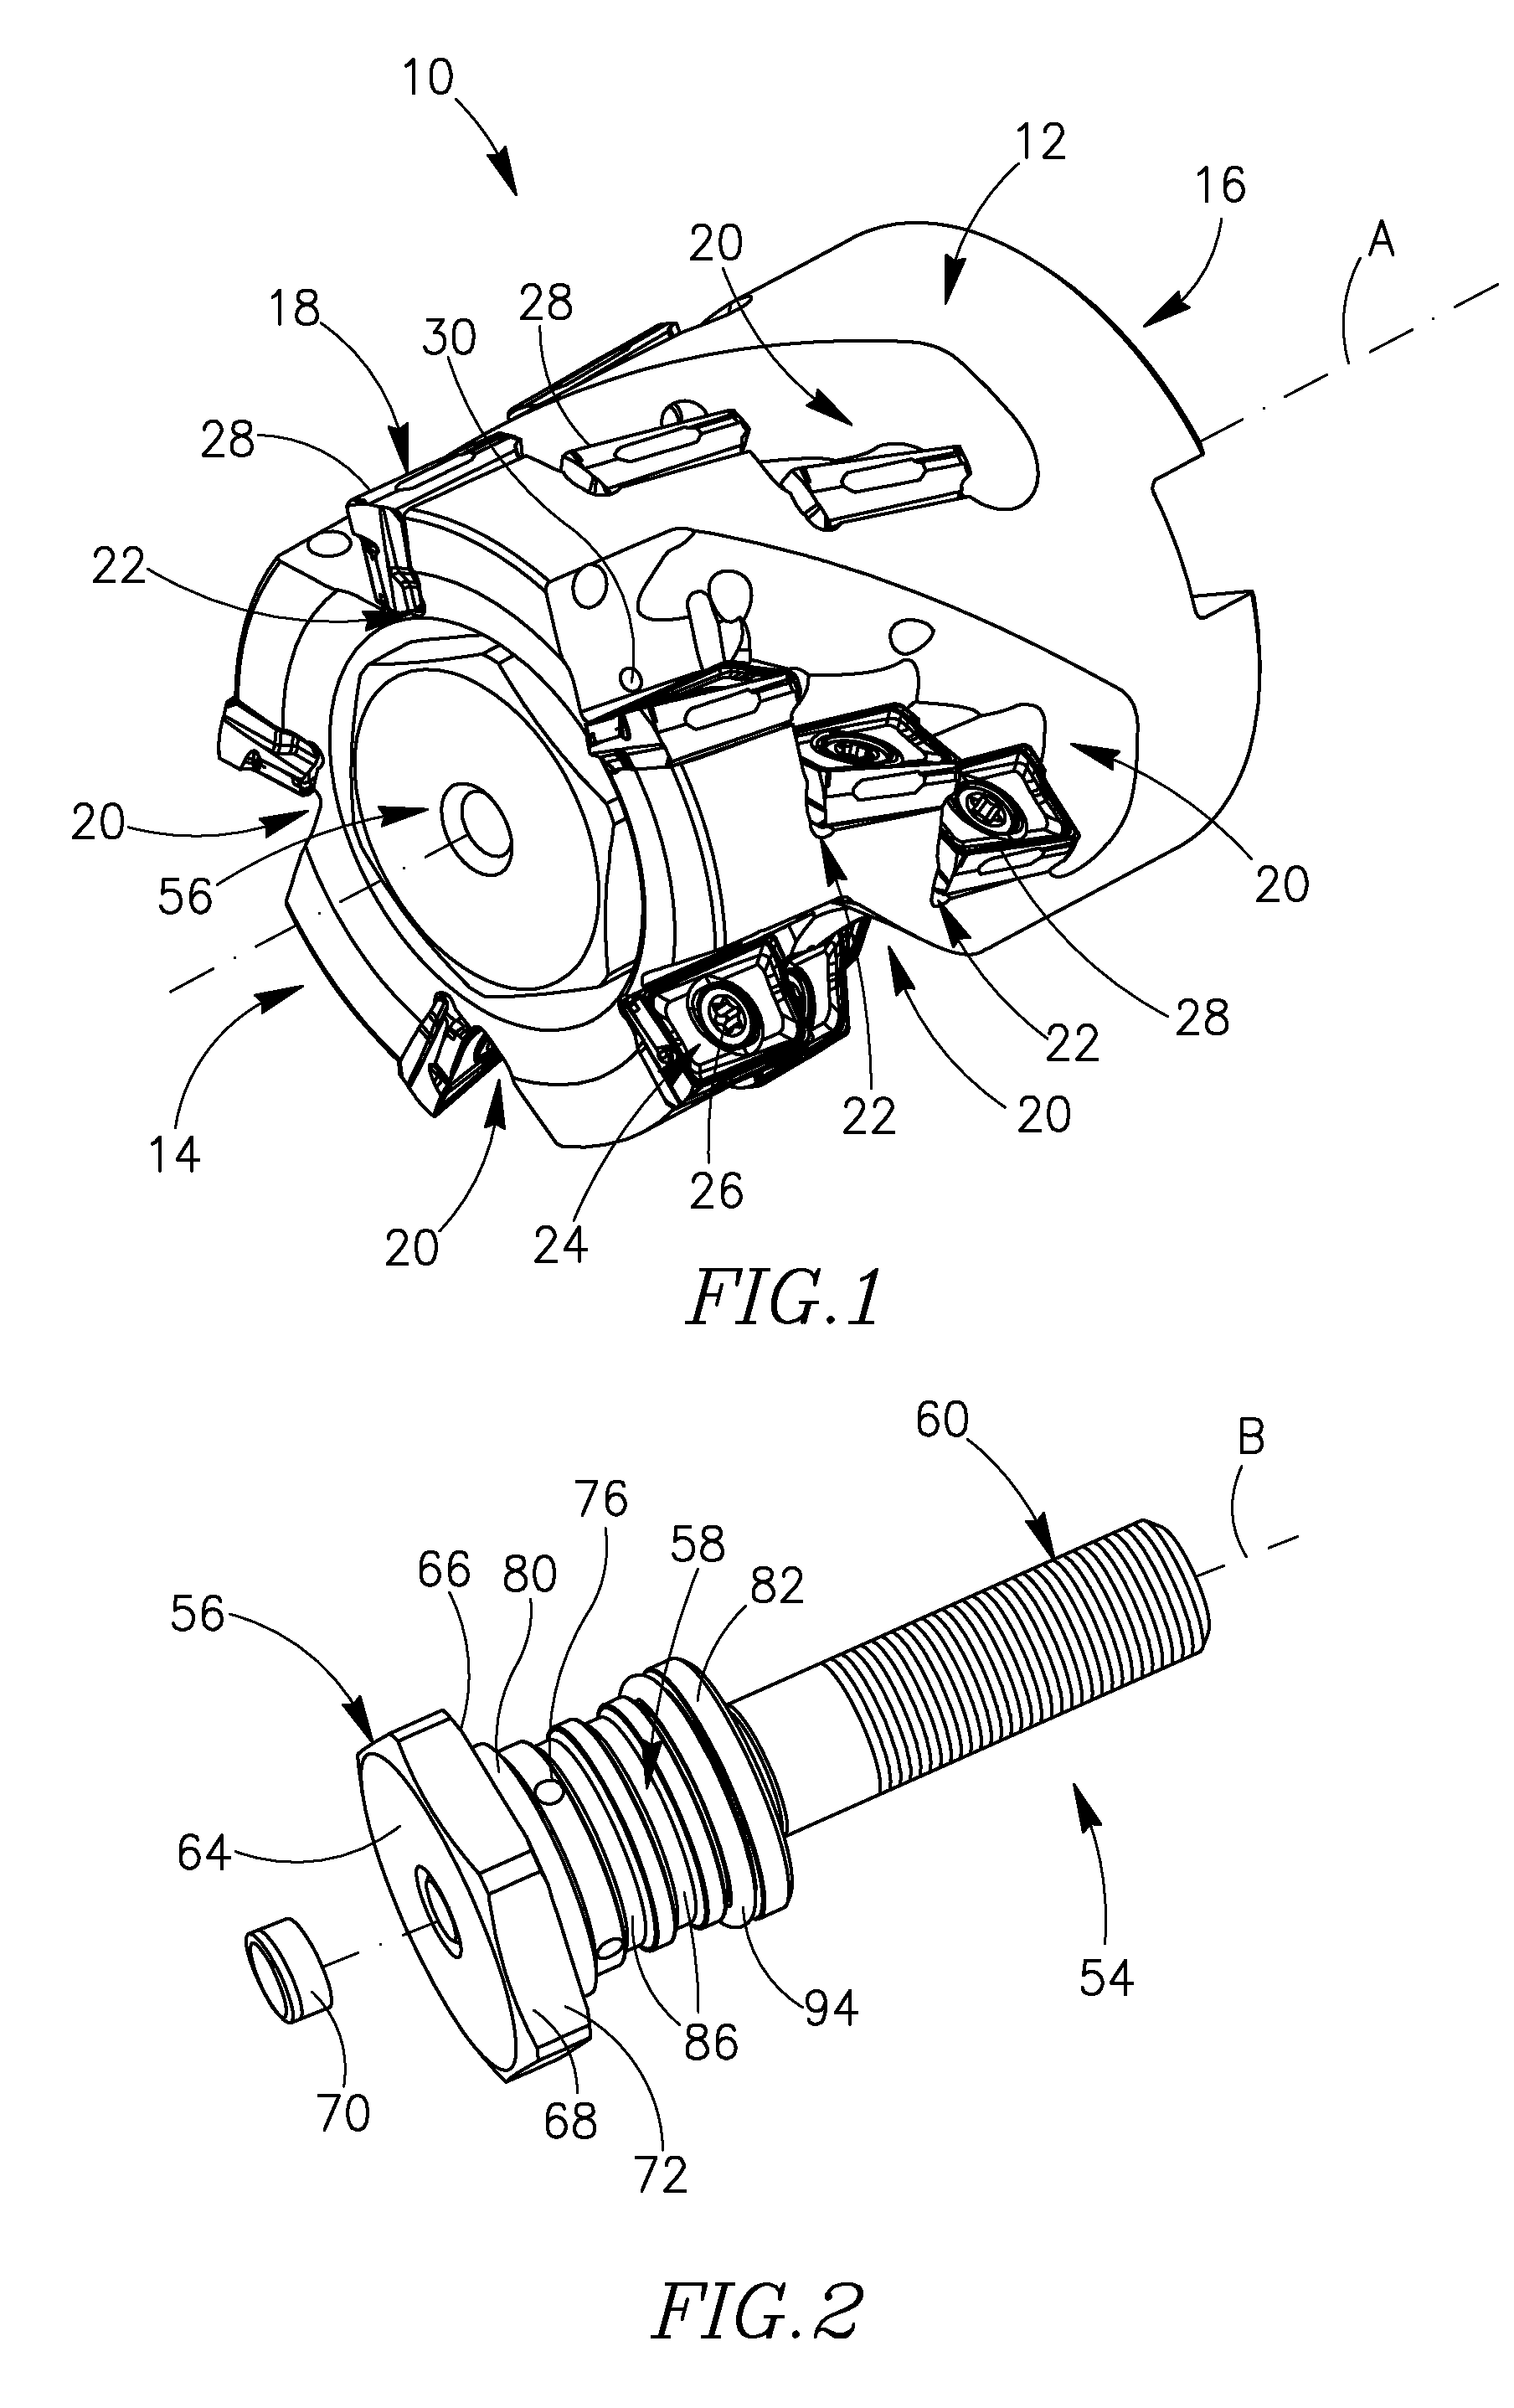 Rotary Cutting Tool Having an Adjustable Cooling Mechanism